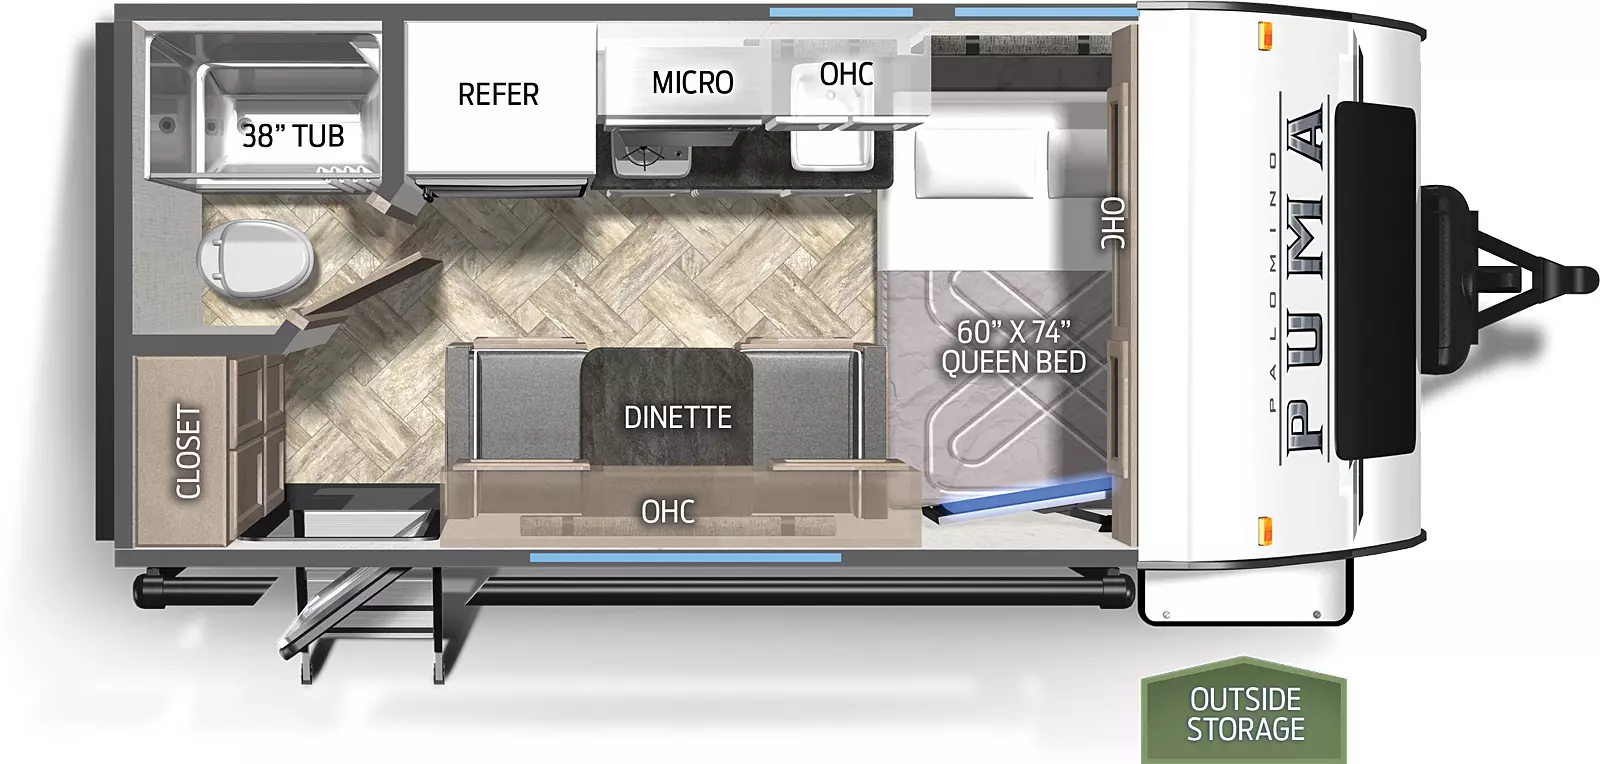 The 12FBX has no slide outs. Exterior features include a 10 foot awning. Interior layout from the front to back: queen bed with end table; booth dinette; kitchen with cooktop and refrigerator; full bathroom; closet.
